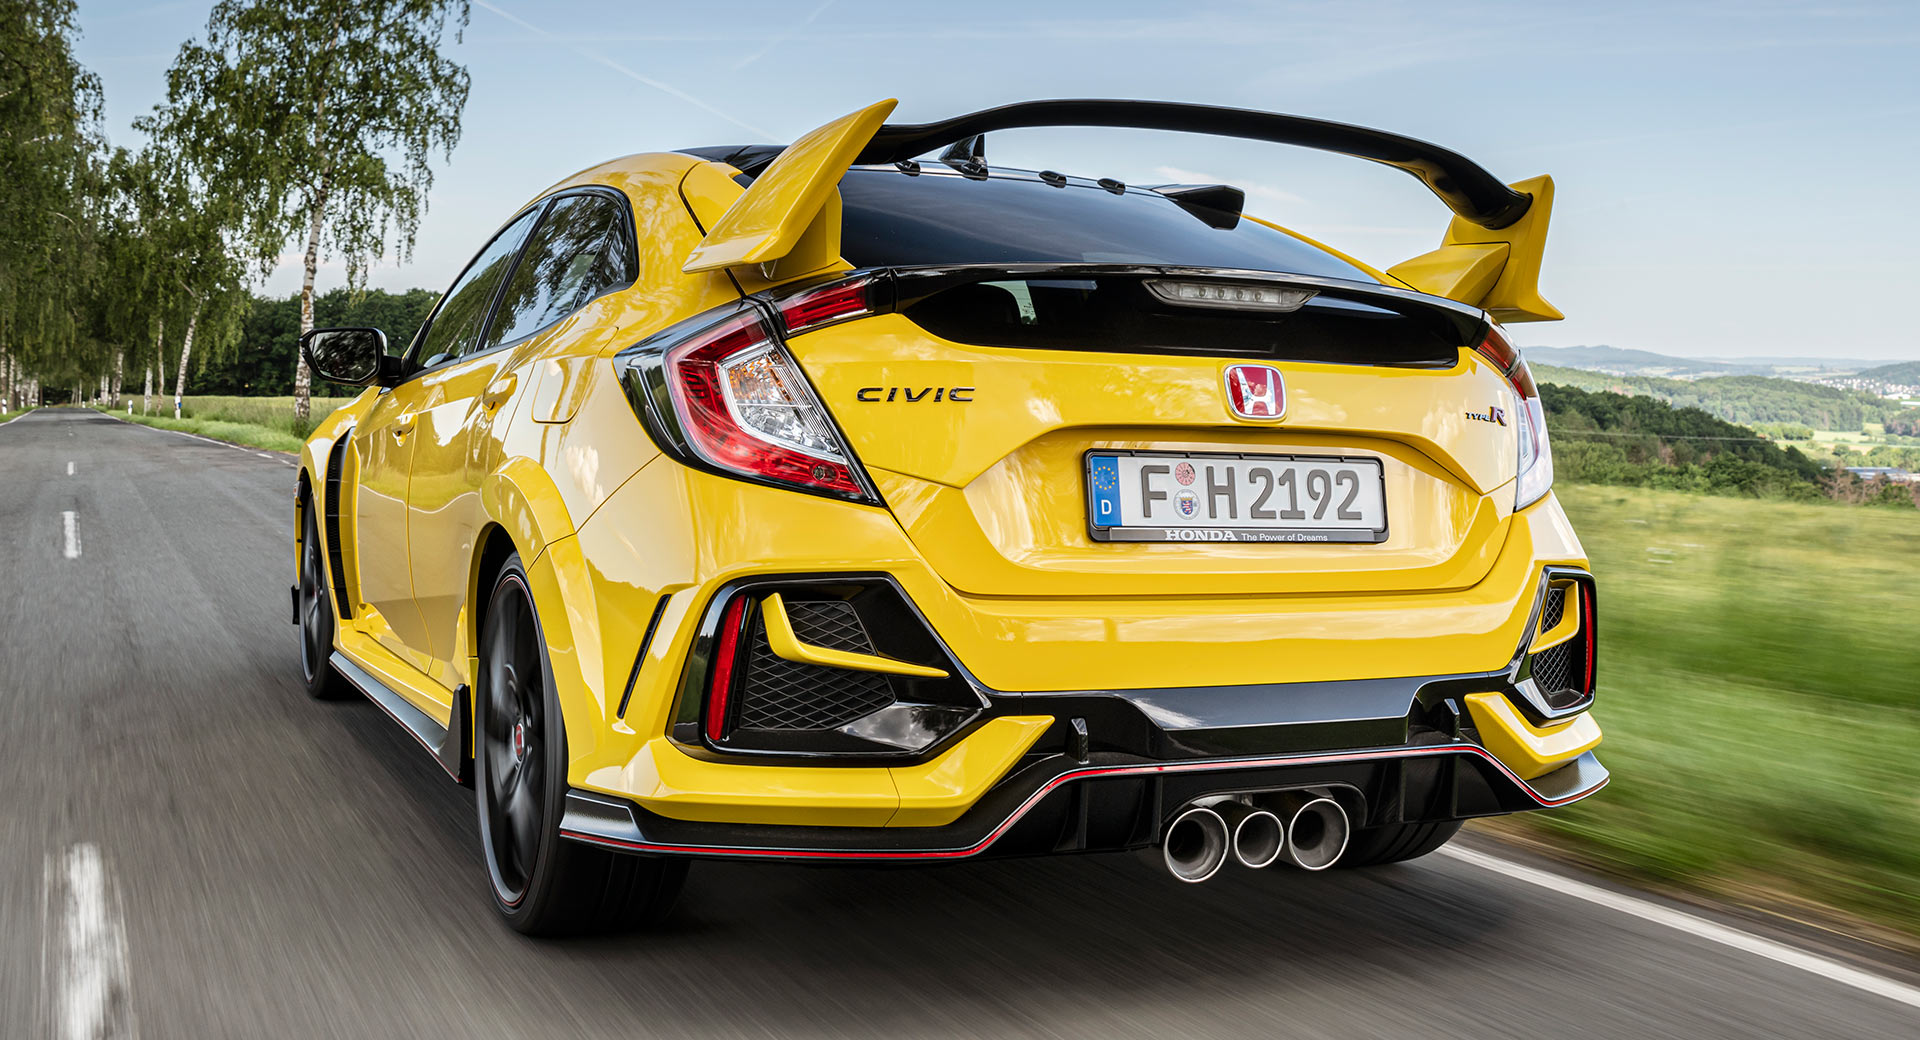 Honda To Sell 21 Civic Type R Limited Edition Through A Lottery In Australia Carscoops